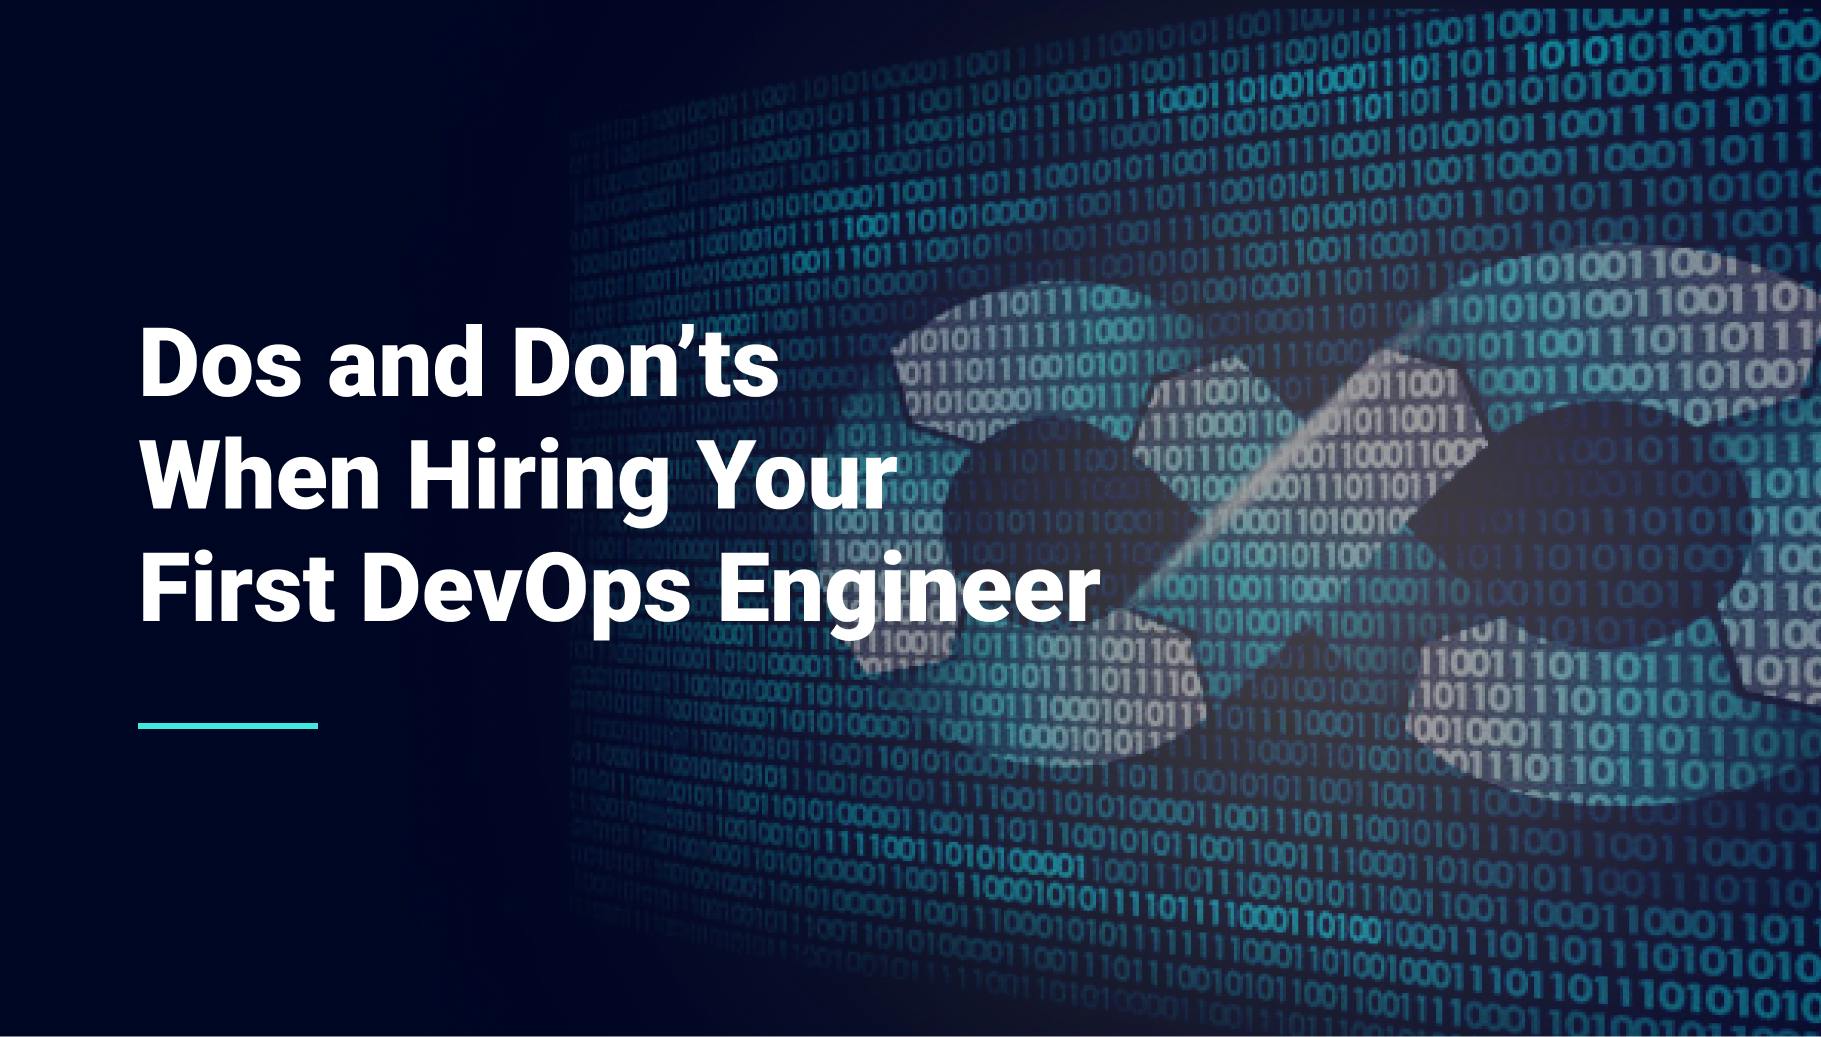 Dos and Don’ts When Hiring Your First DevOps Engineer - Qovery